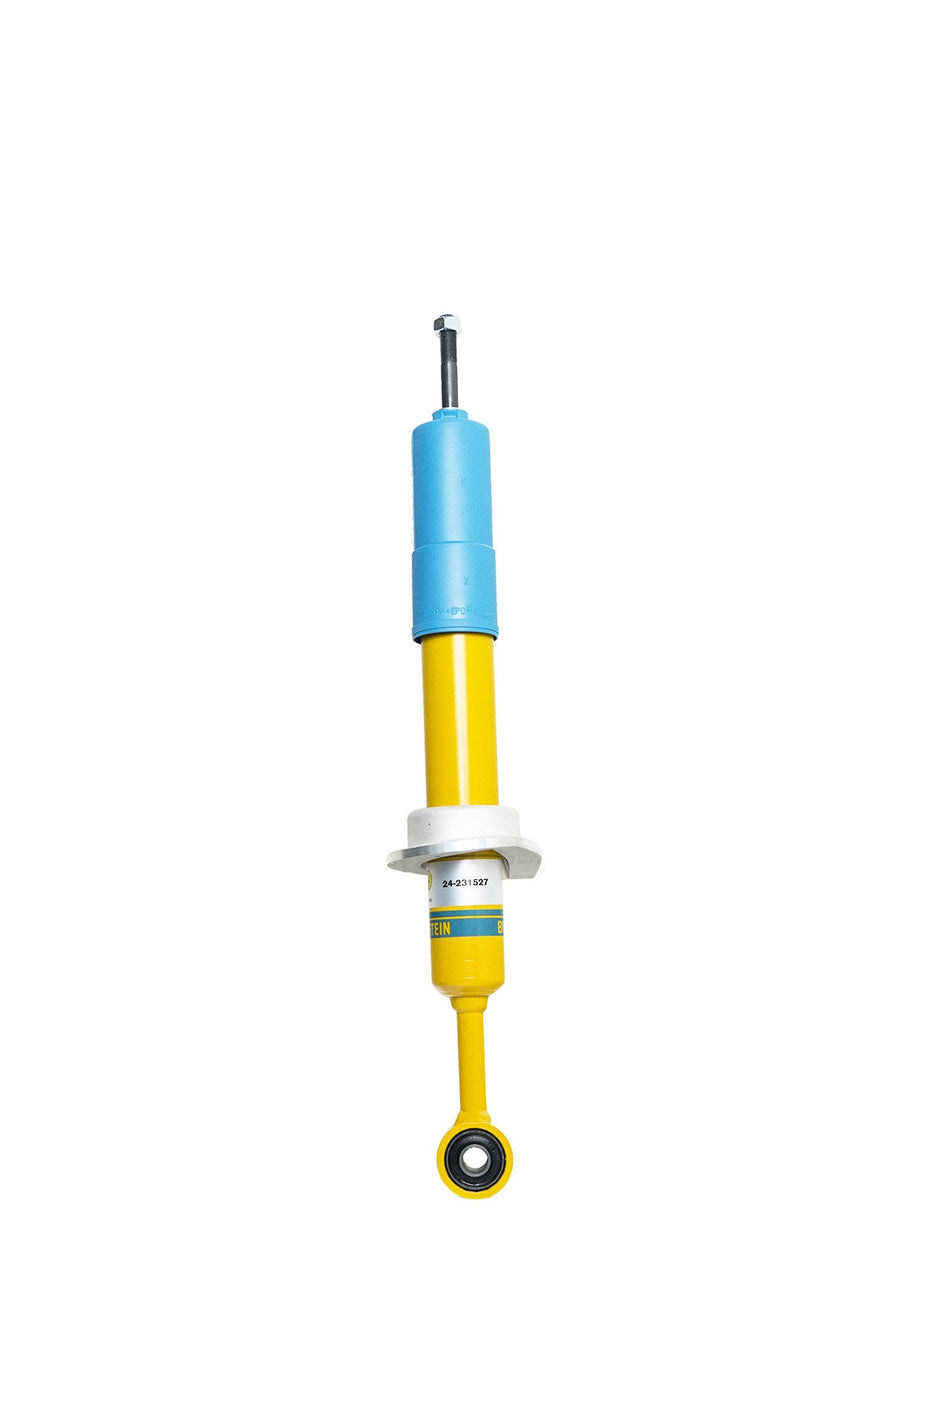 Bilstein Front Shock for Mitsubushi Pajero NM,NP,NS,NT,NW,NX